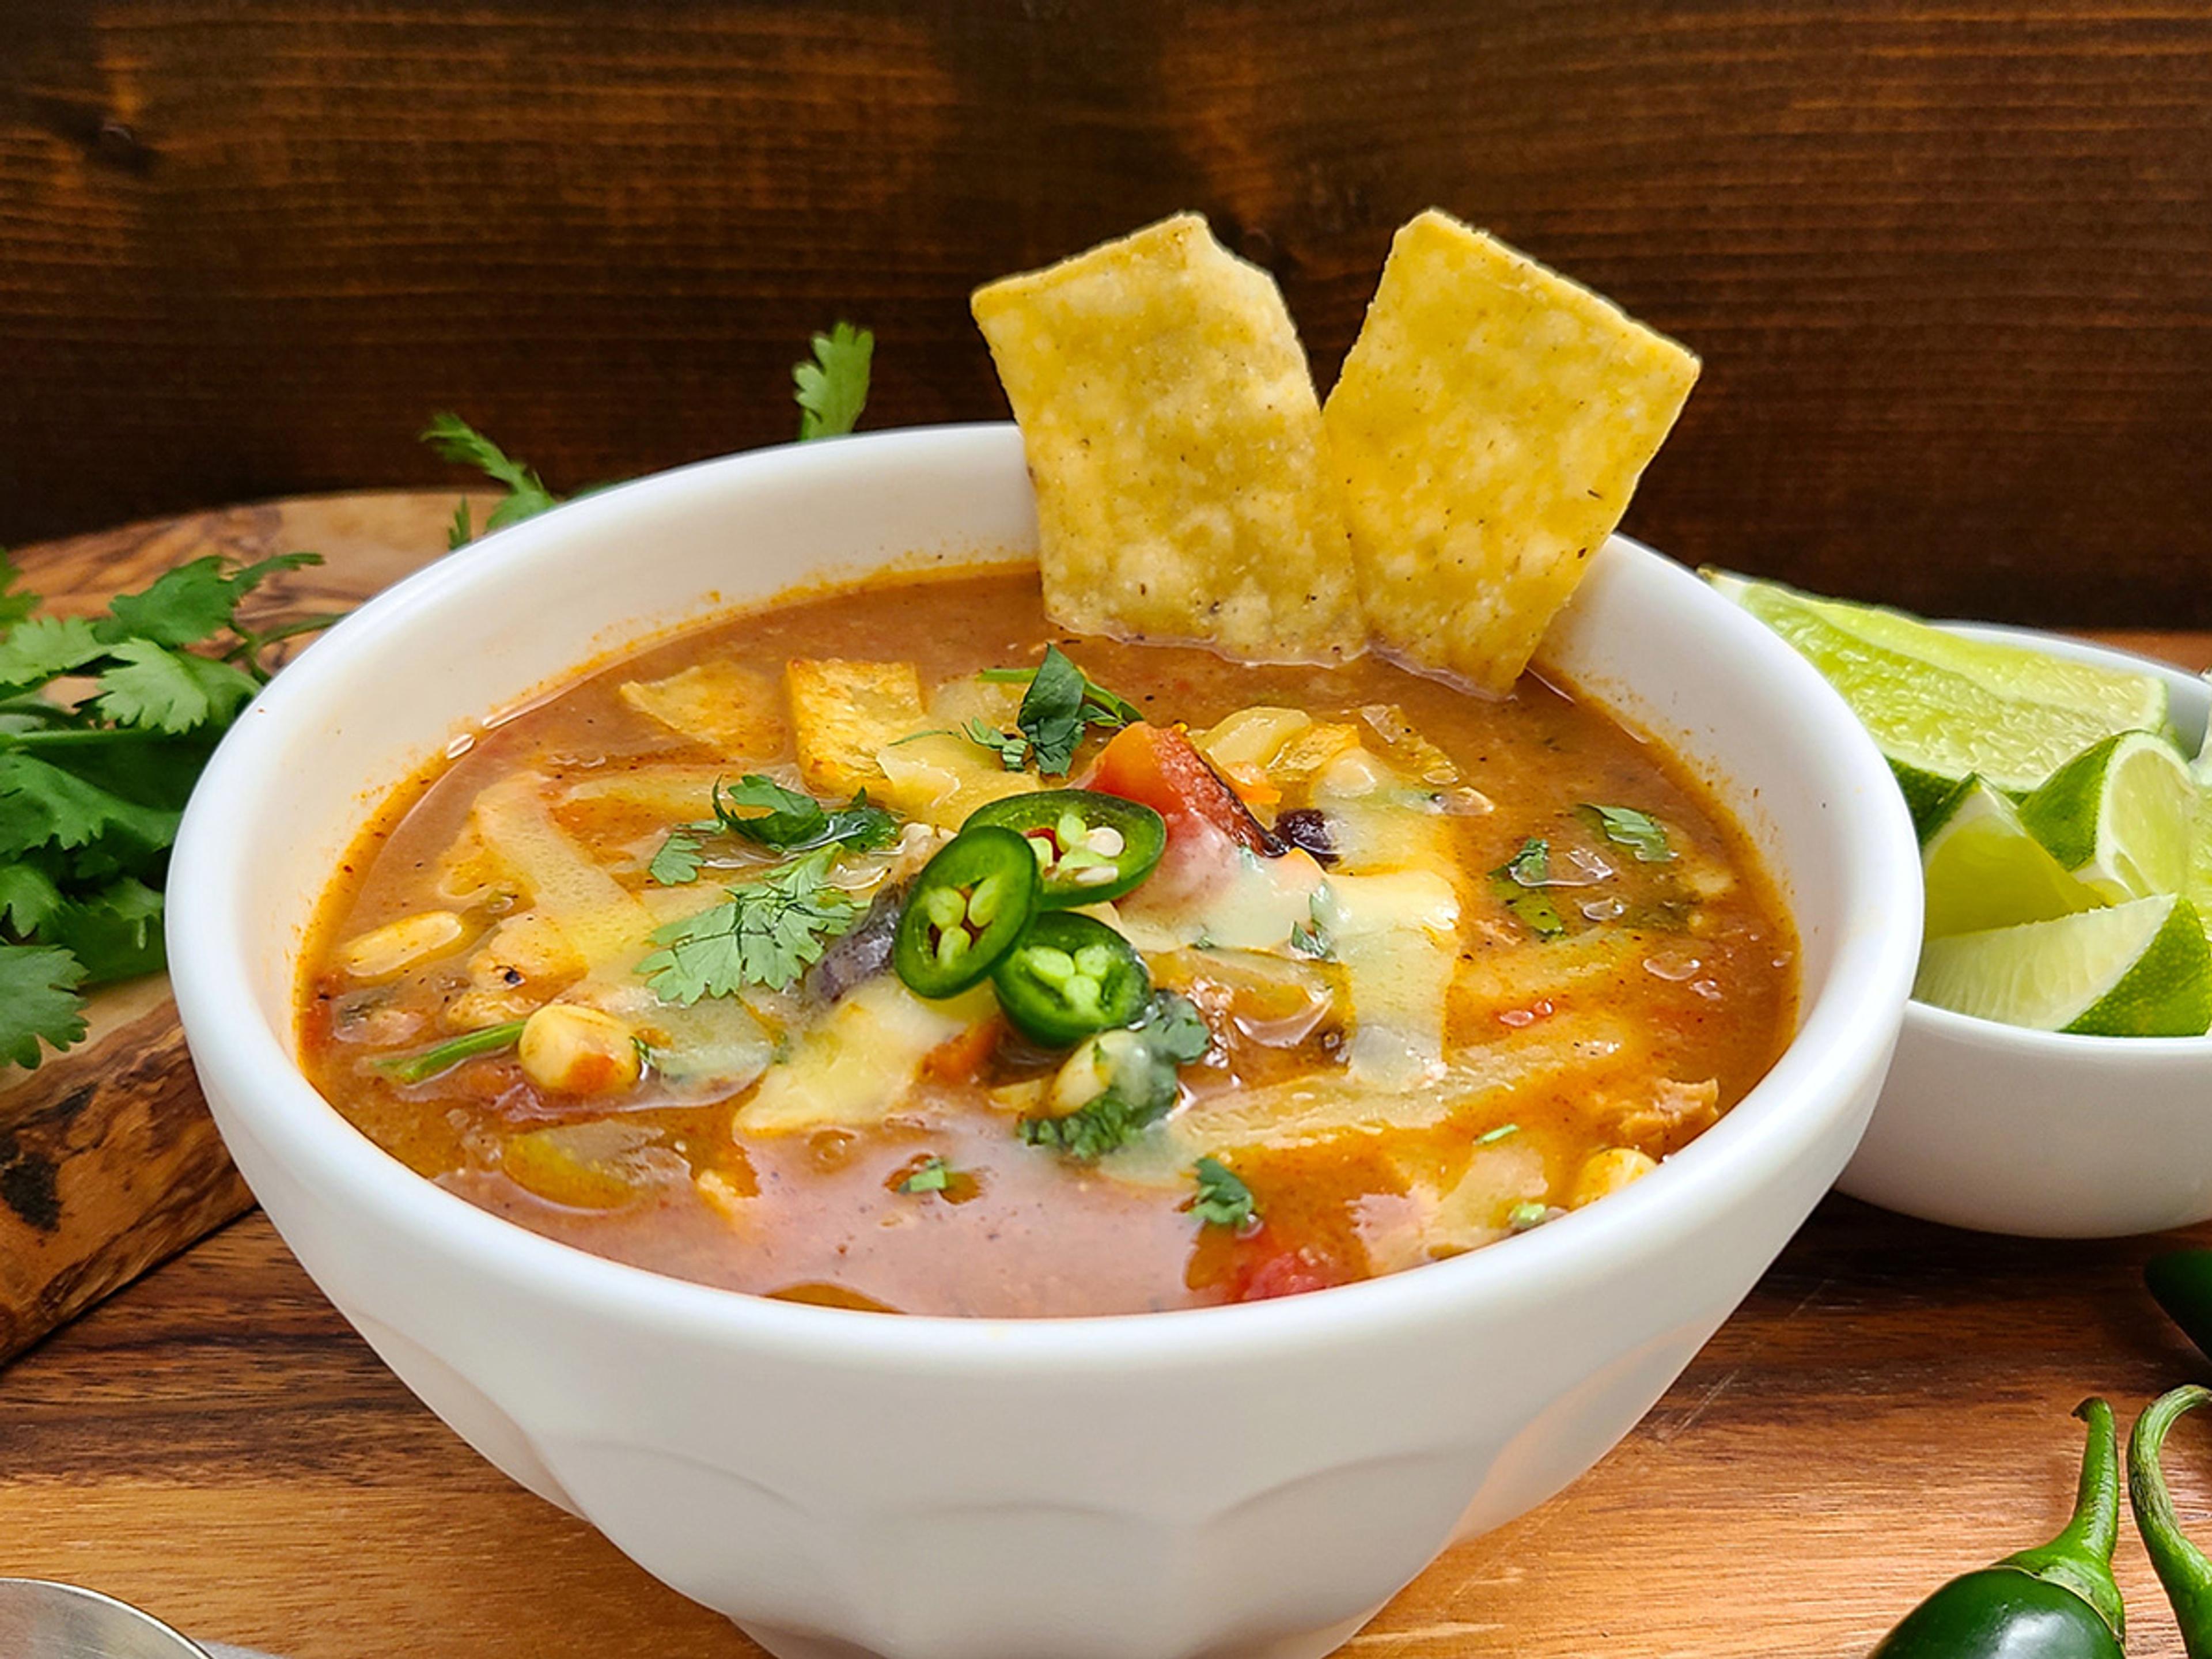 A colorful tomato-based chicken tortilla soup topped with corn chips, shredded cheese, cilantro leaves, and sliced jalapeños.